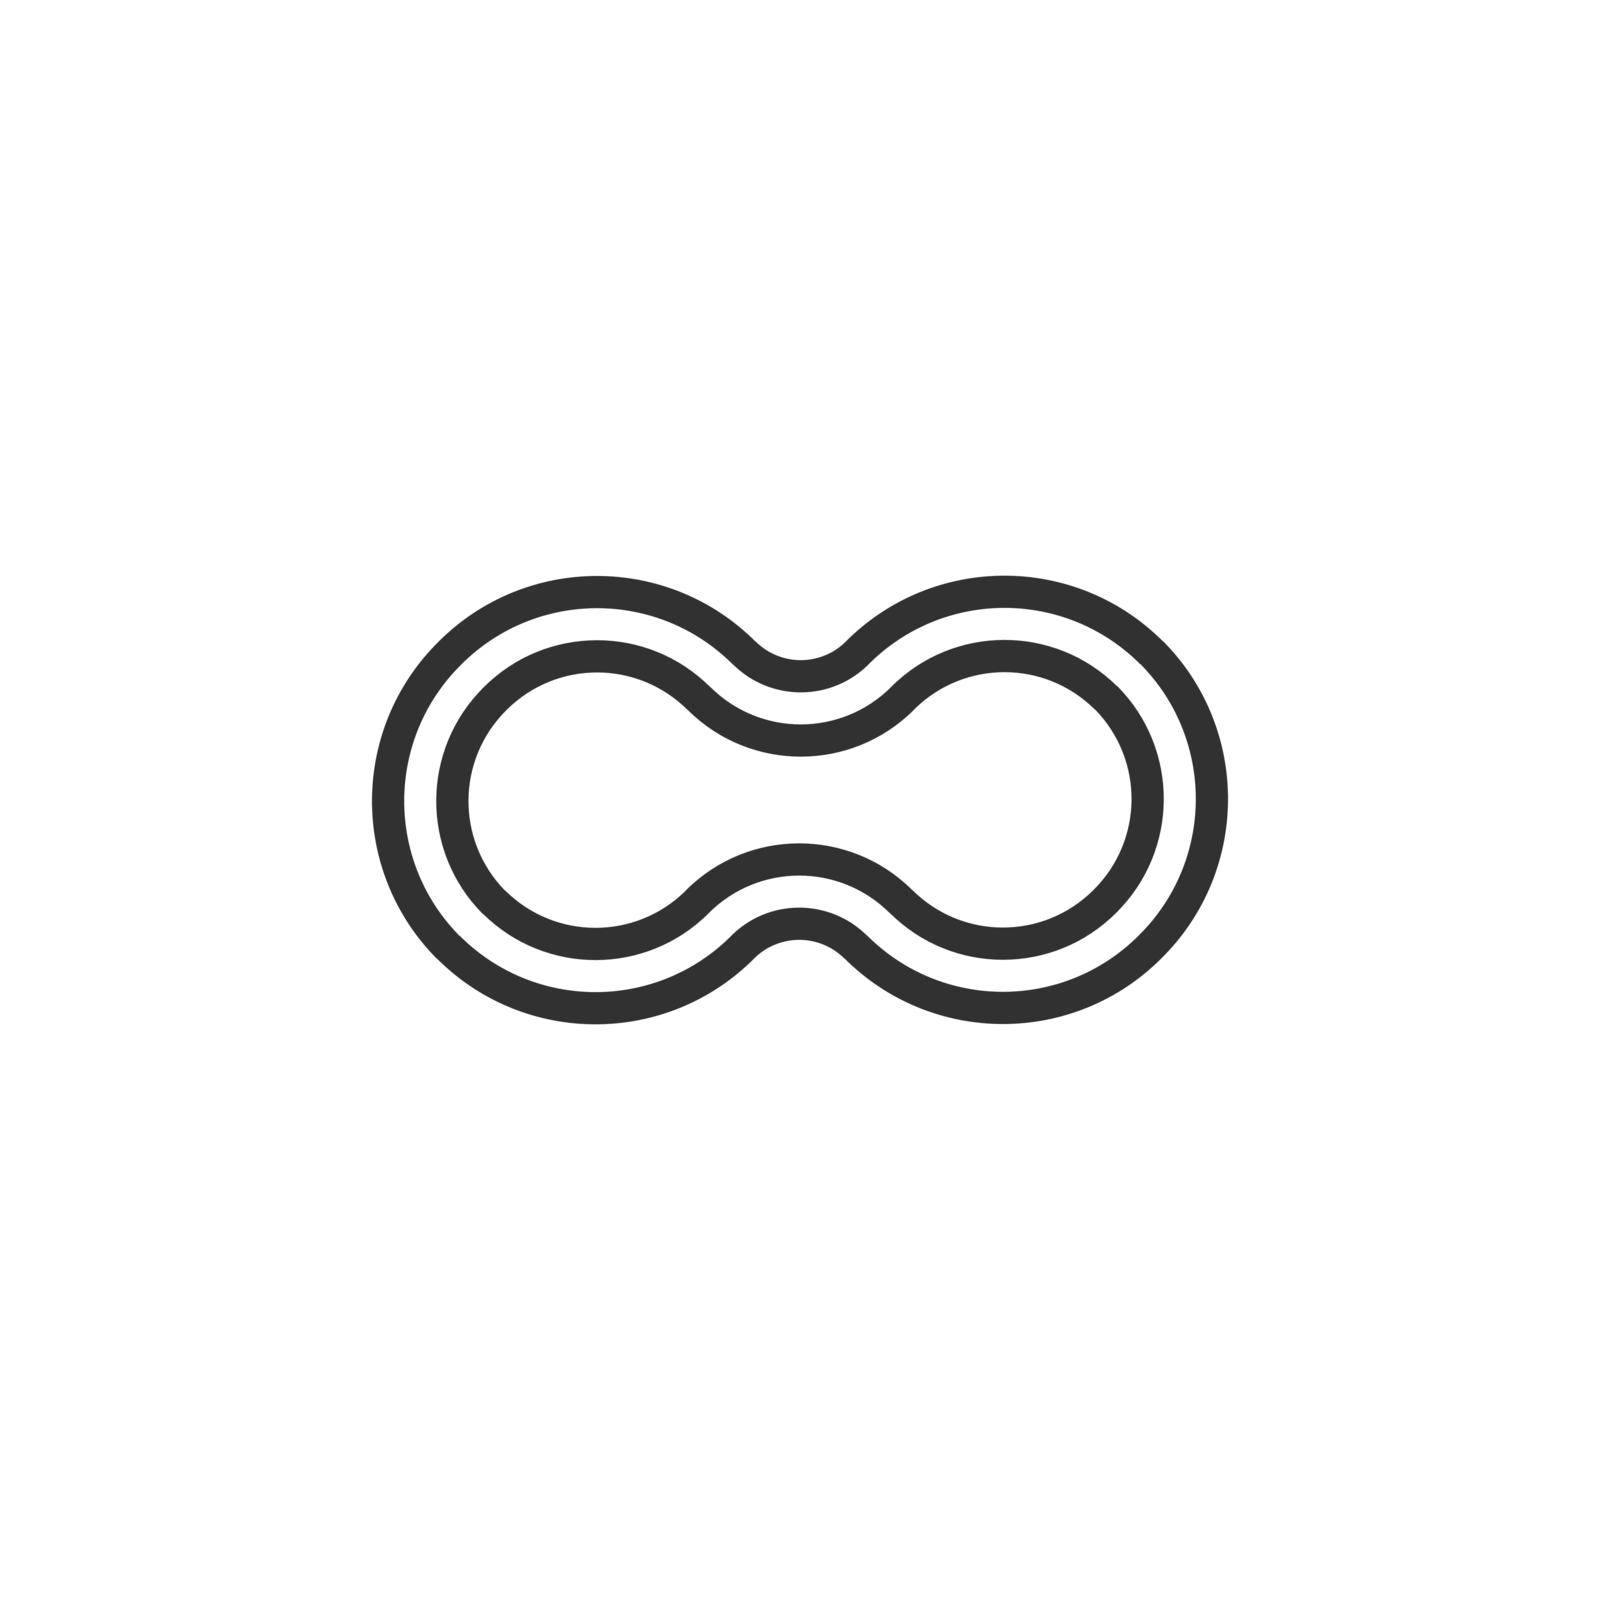 Linear Infinity loop symbol. Circle icon. Flat design. Minimal and simple. Stock Vector illustration isolated on white background. by Kyrylov